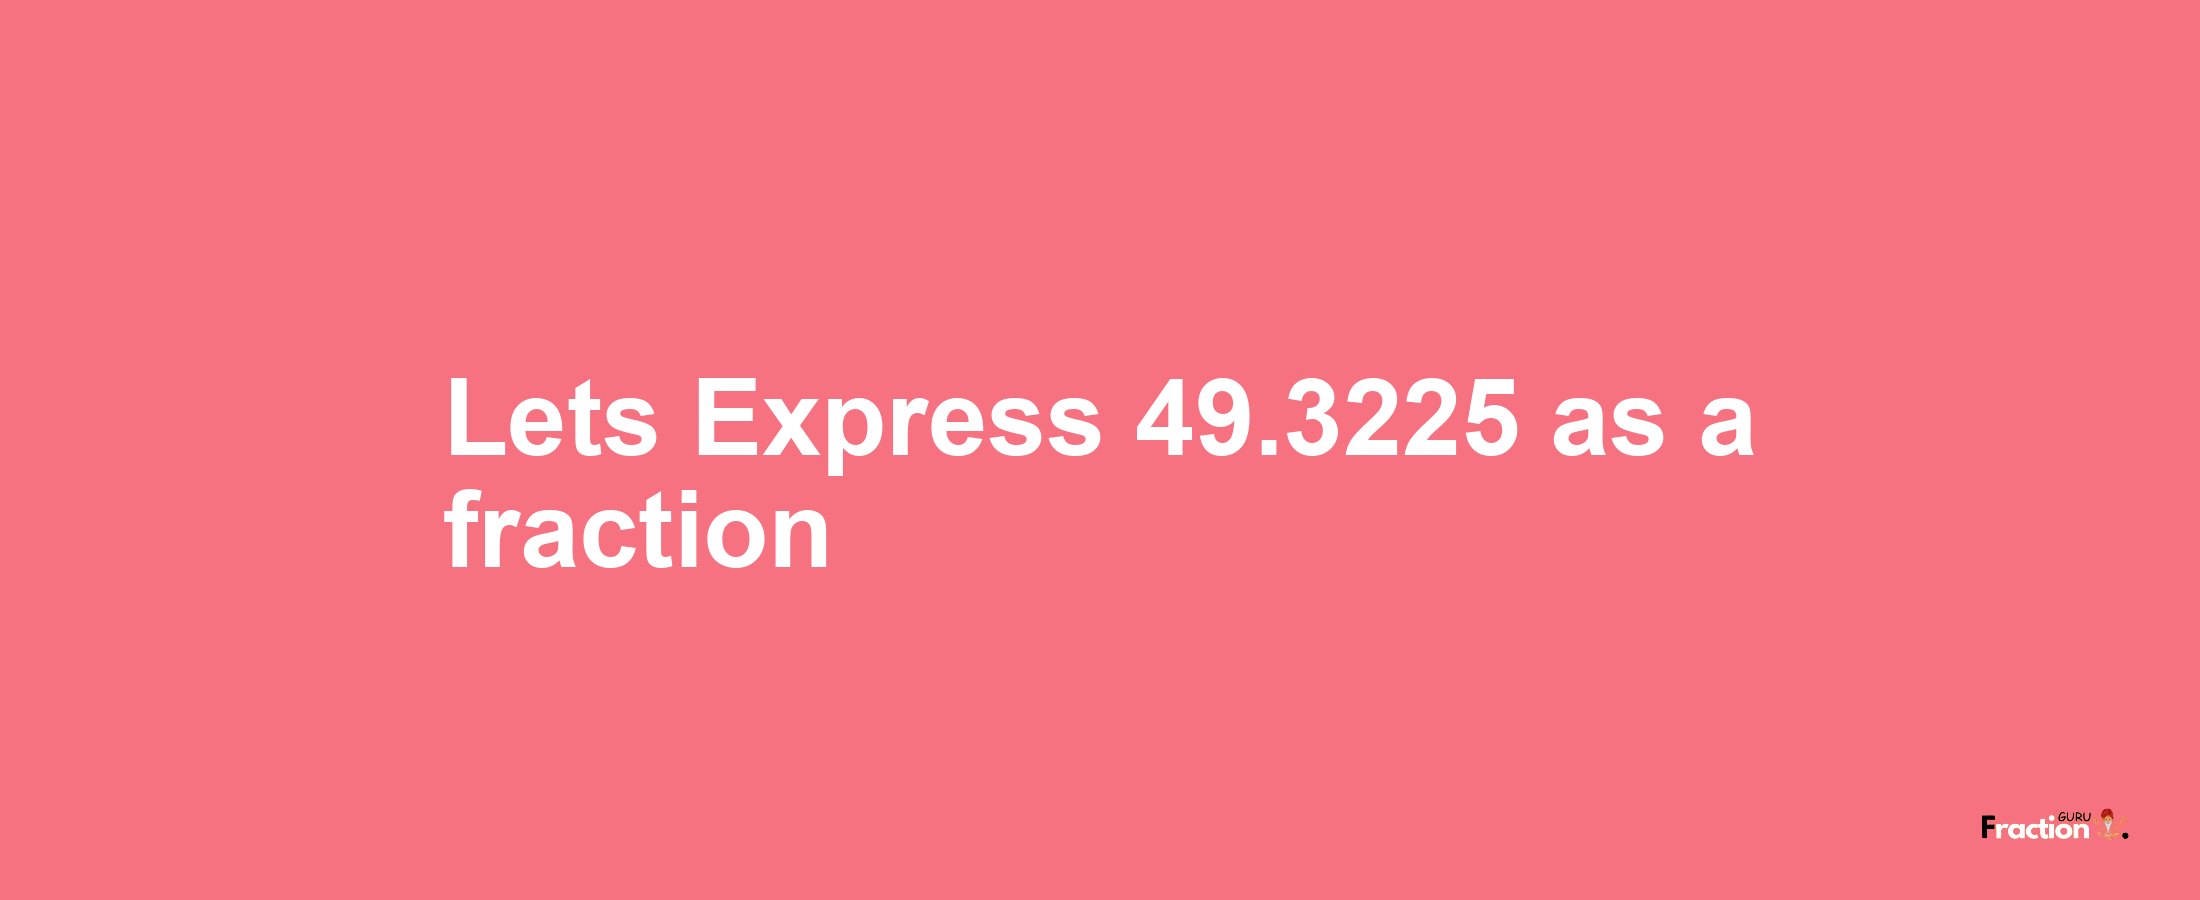 Lets Express 49.3225 as afraction